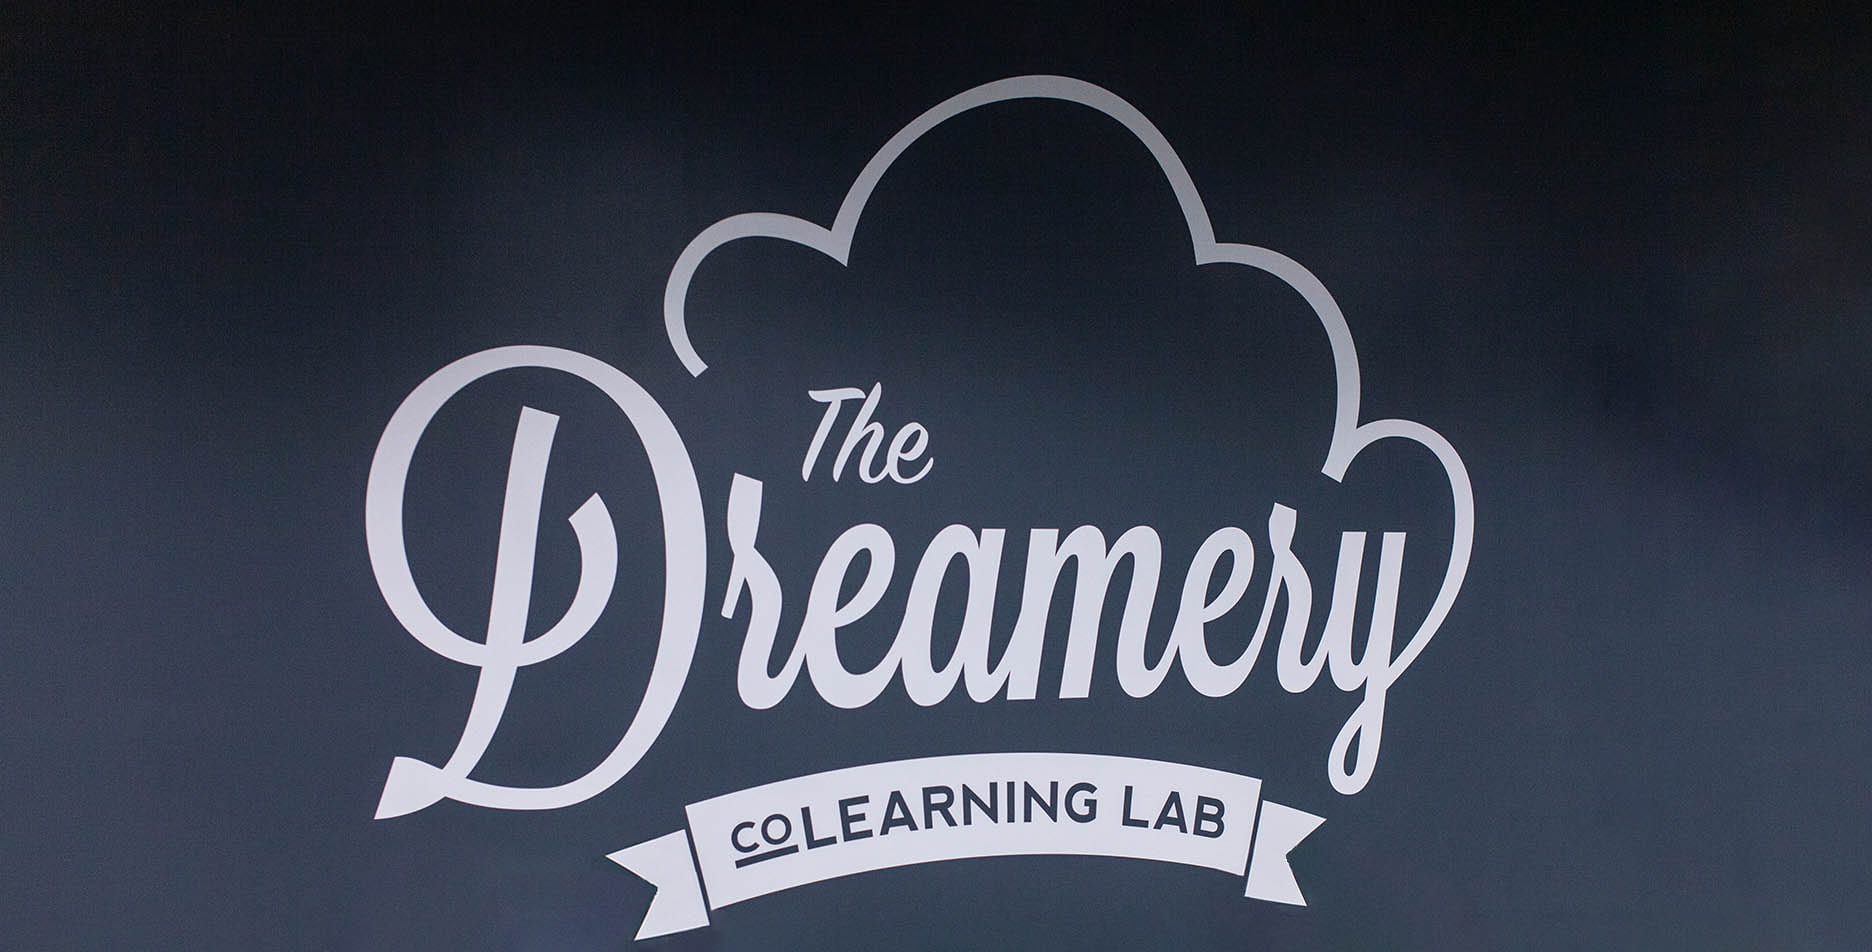 Logo The Dreamery painted on wall